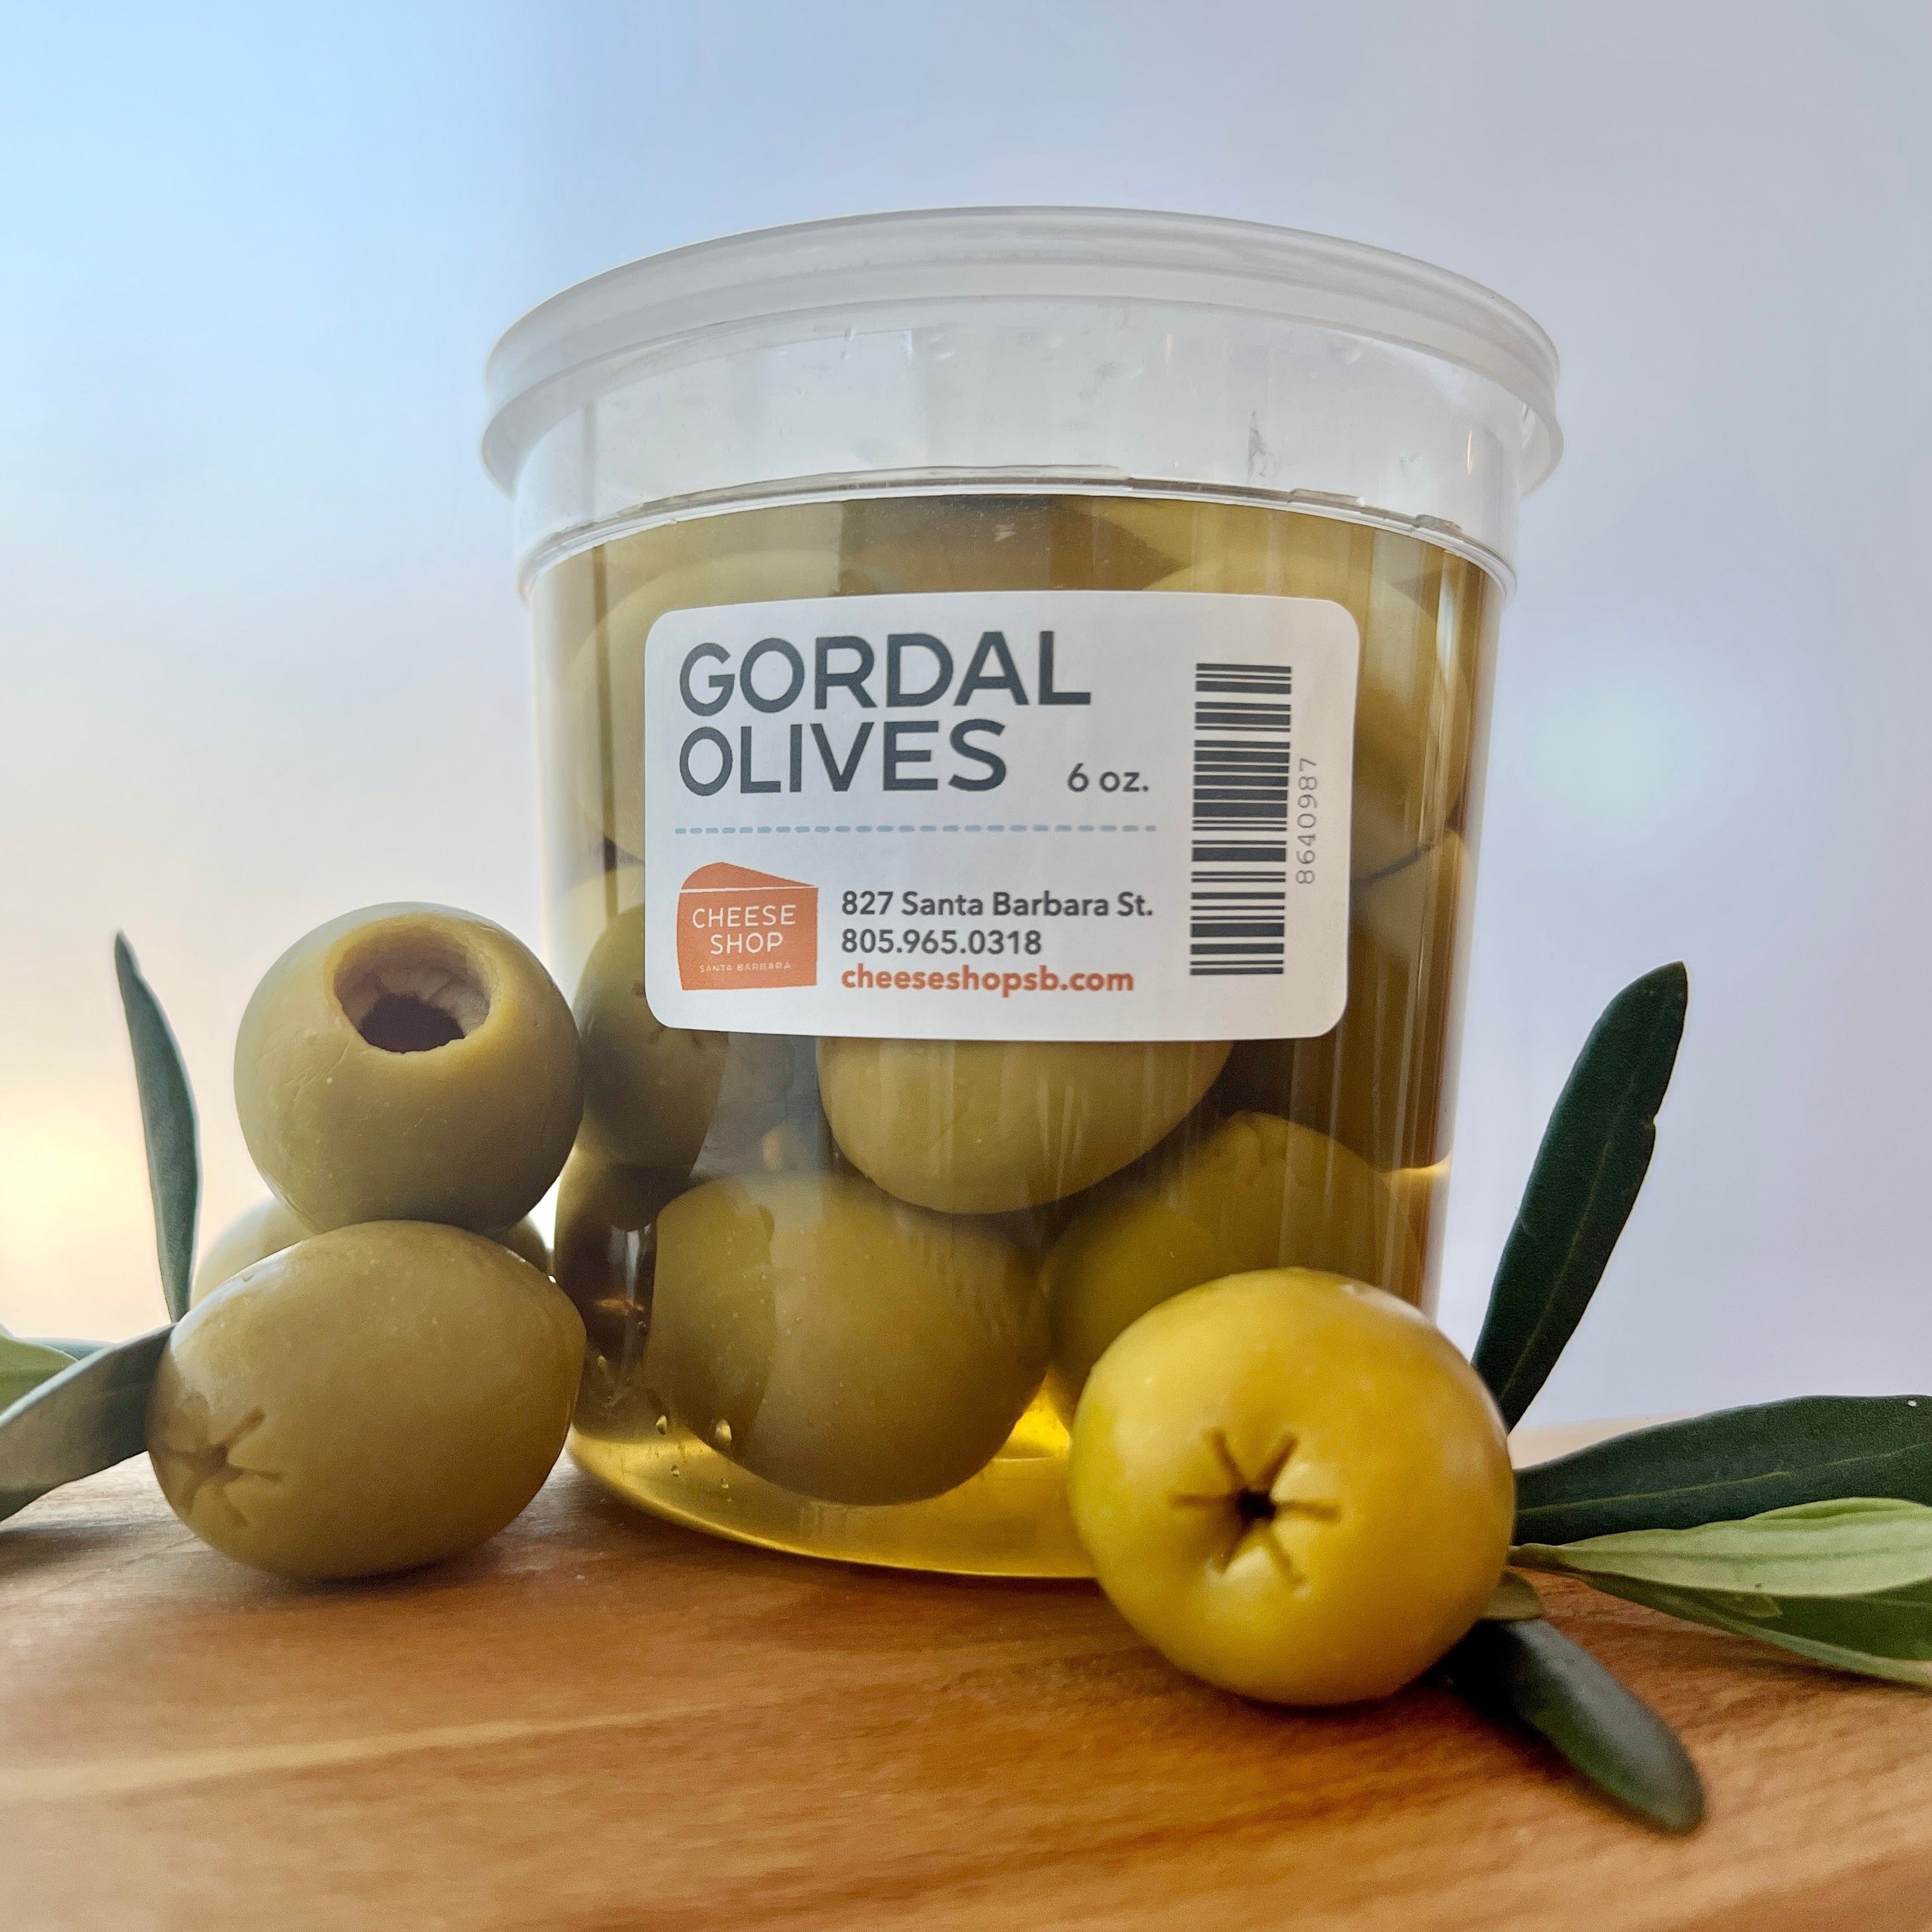 plastic container of gordal pitted oolives